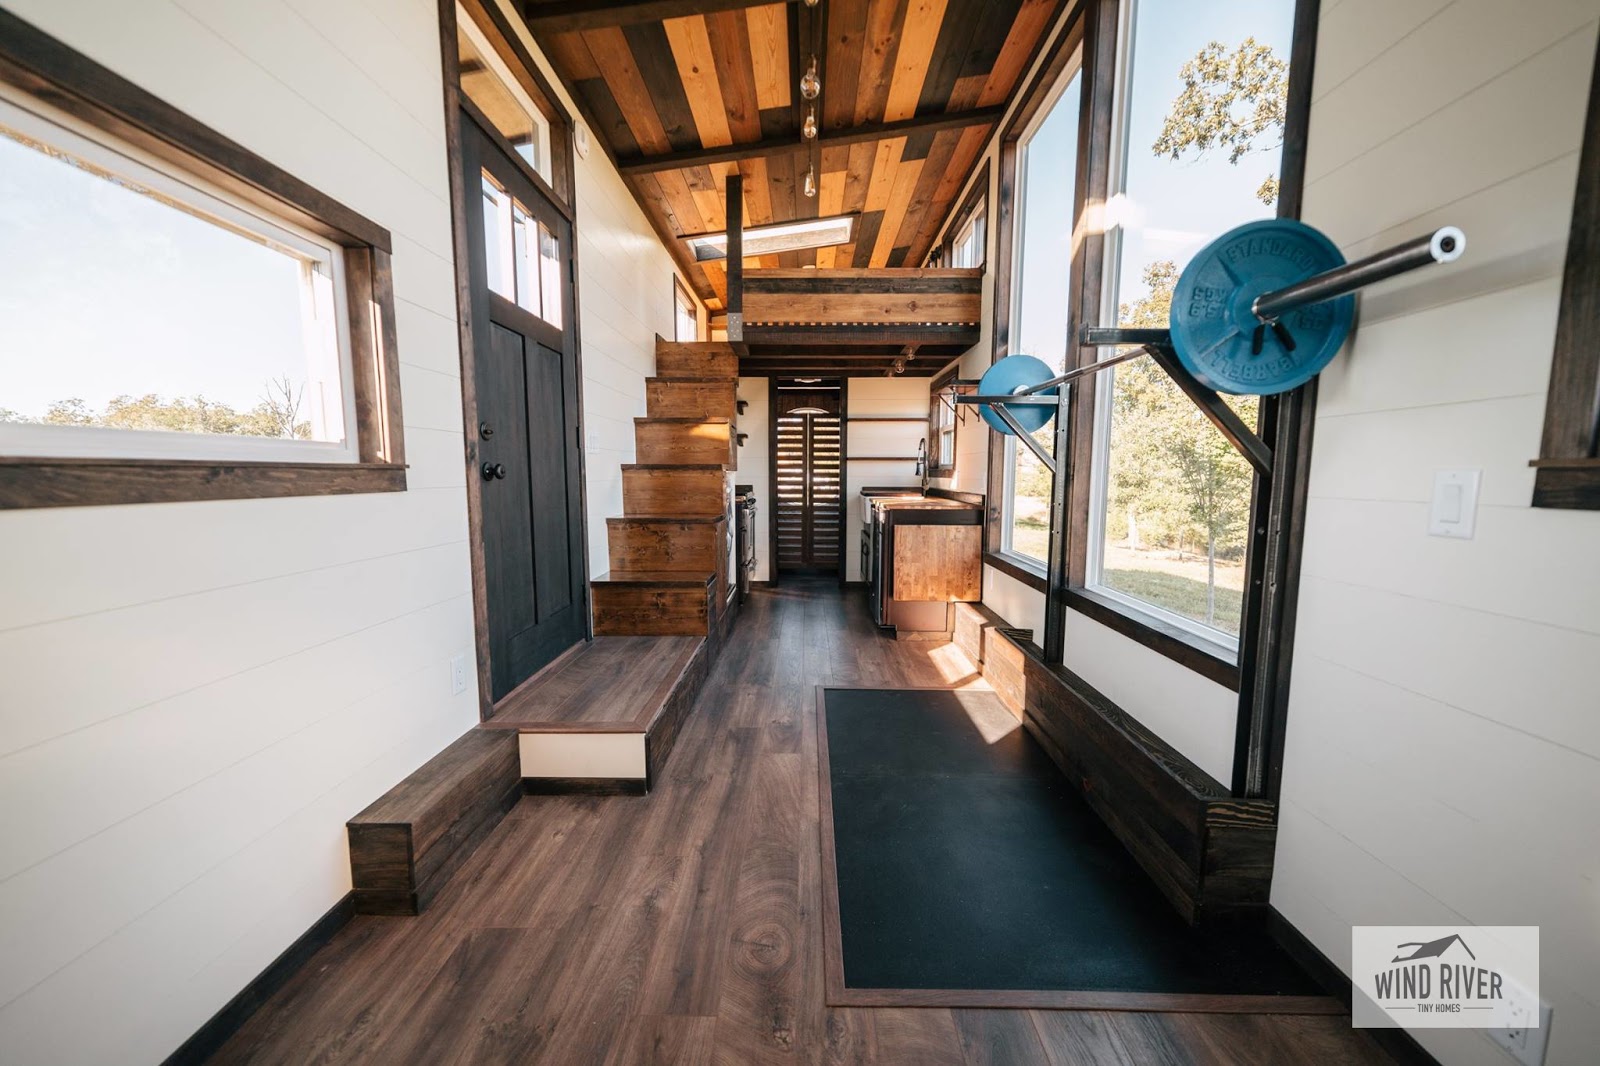 Wyoming - Wind River Tiny Homes